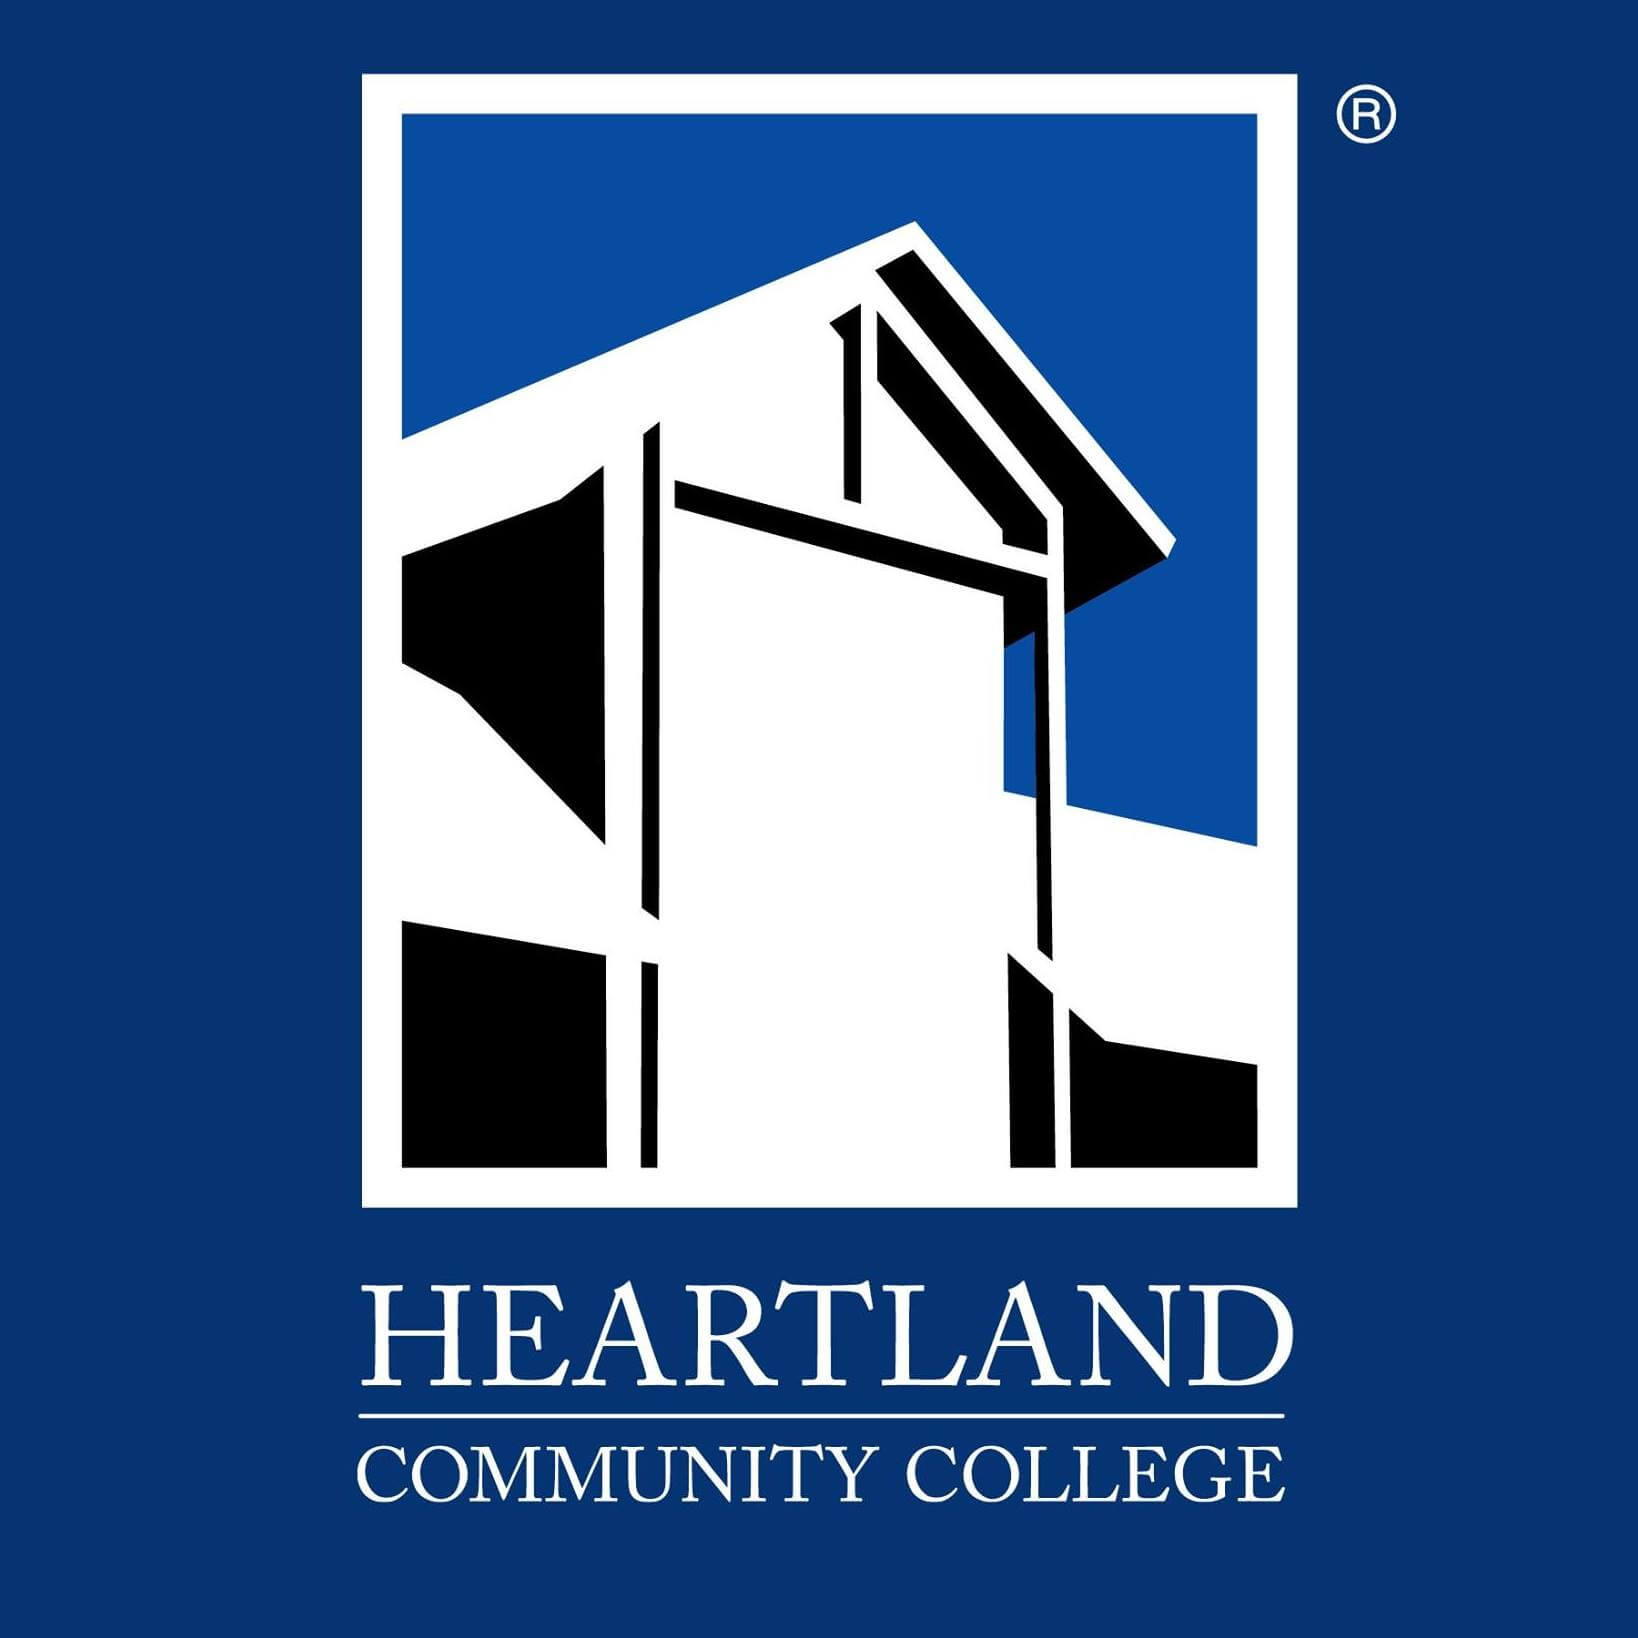 Heartland Community College Deploys YuJa Enterprise Video Platform and YuJa Panorama for Digital Accessibility Across Campuses